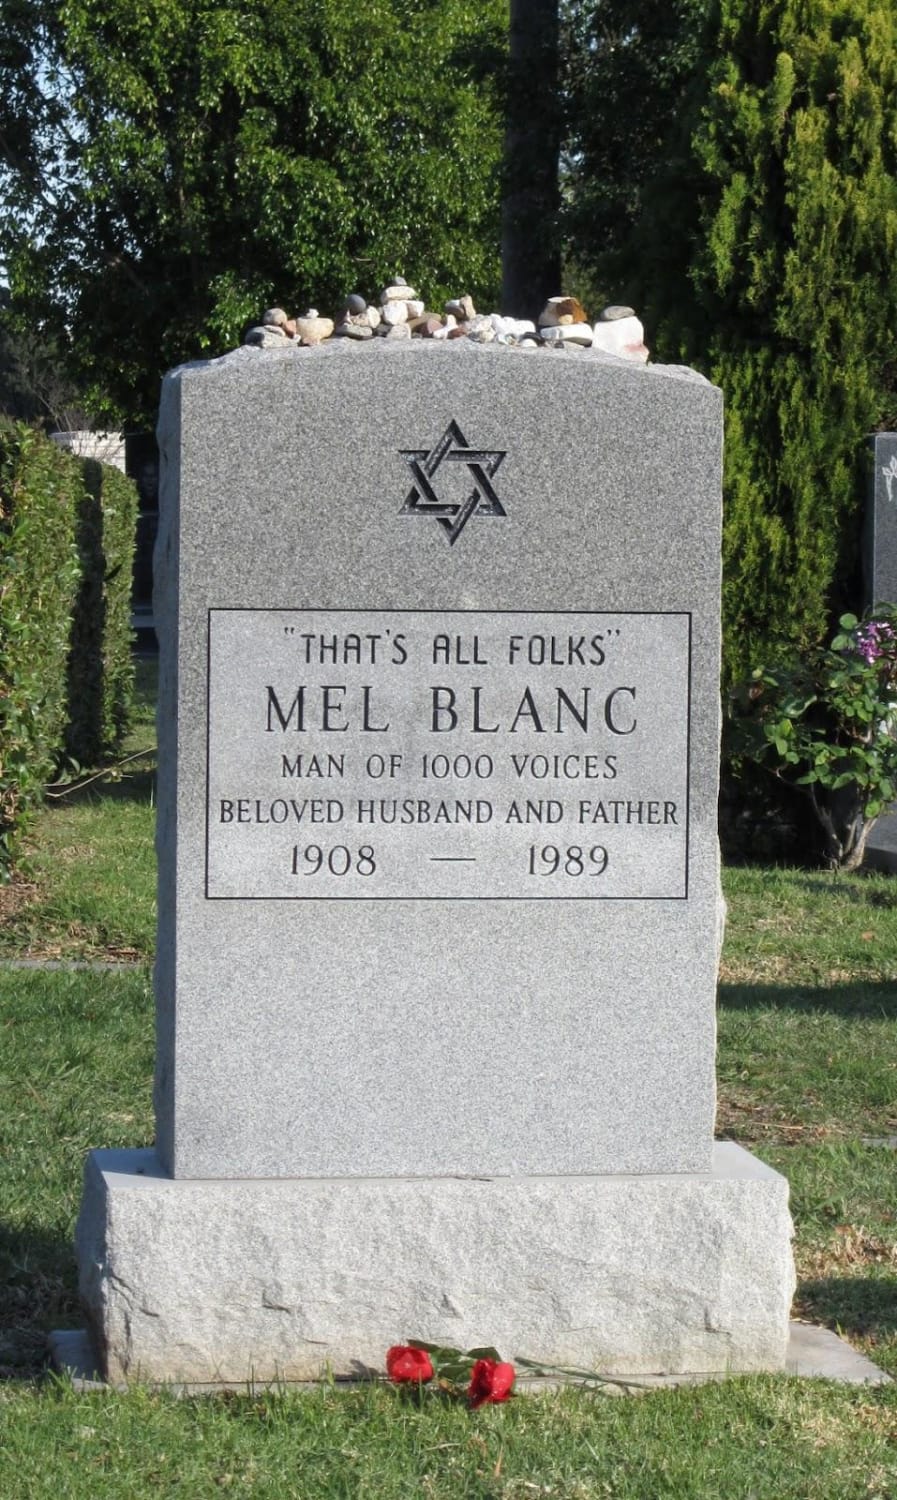 This is the gravestone of Mel Blanc. He voiced many cartoon characters, one of these was Porky Pig